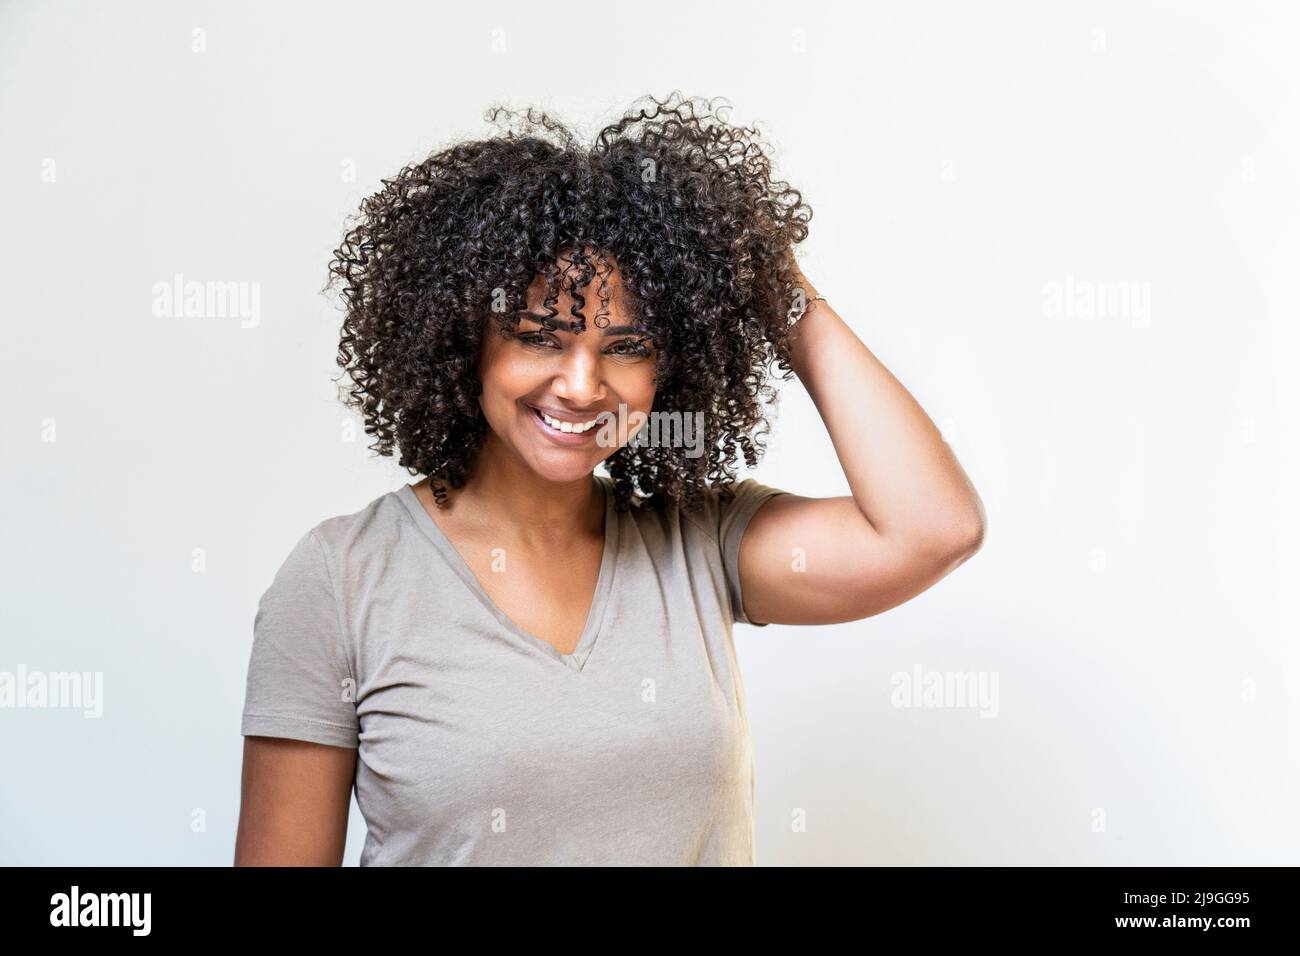 Smiling woman standing against white wall Stock Photo